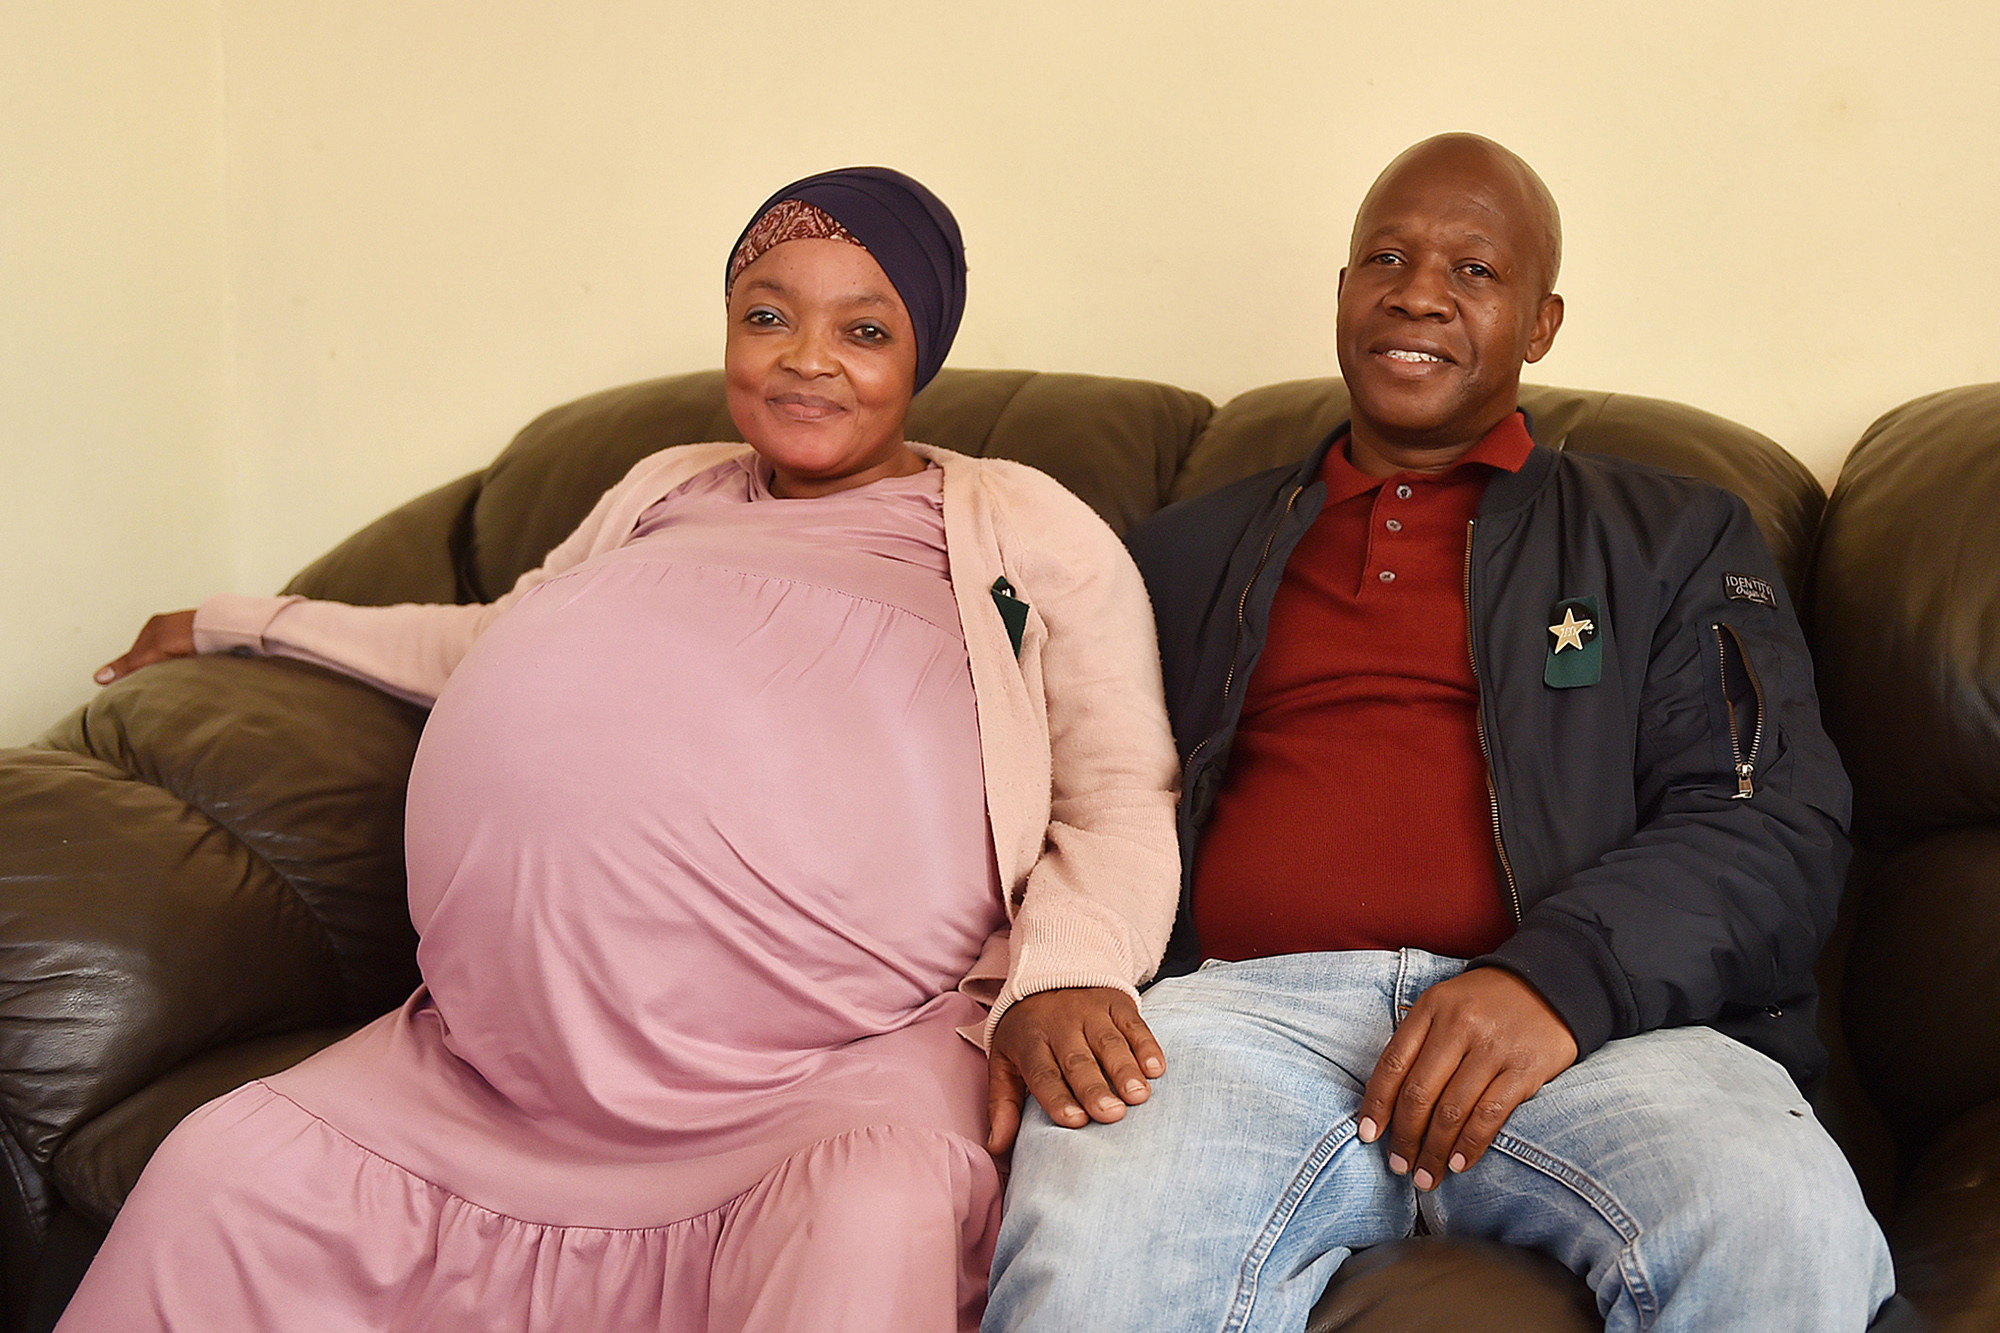 Gosiame Thamara Sithole gave birth by Caesarean section to seven boys and three girls.